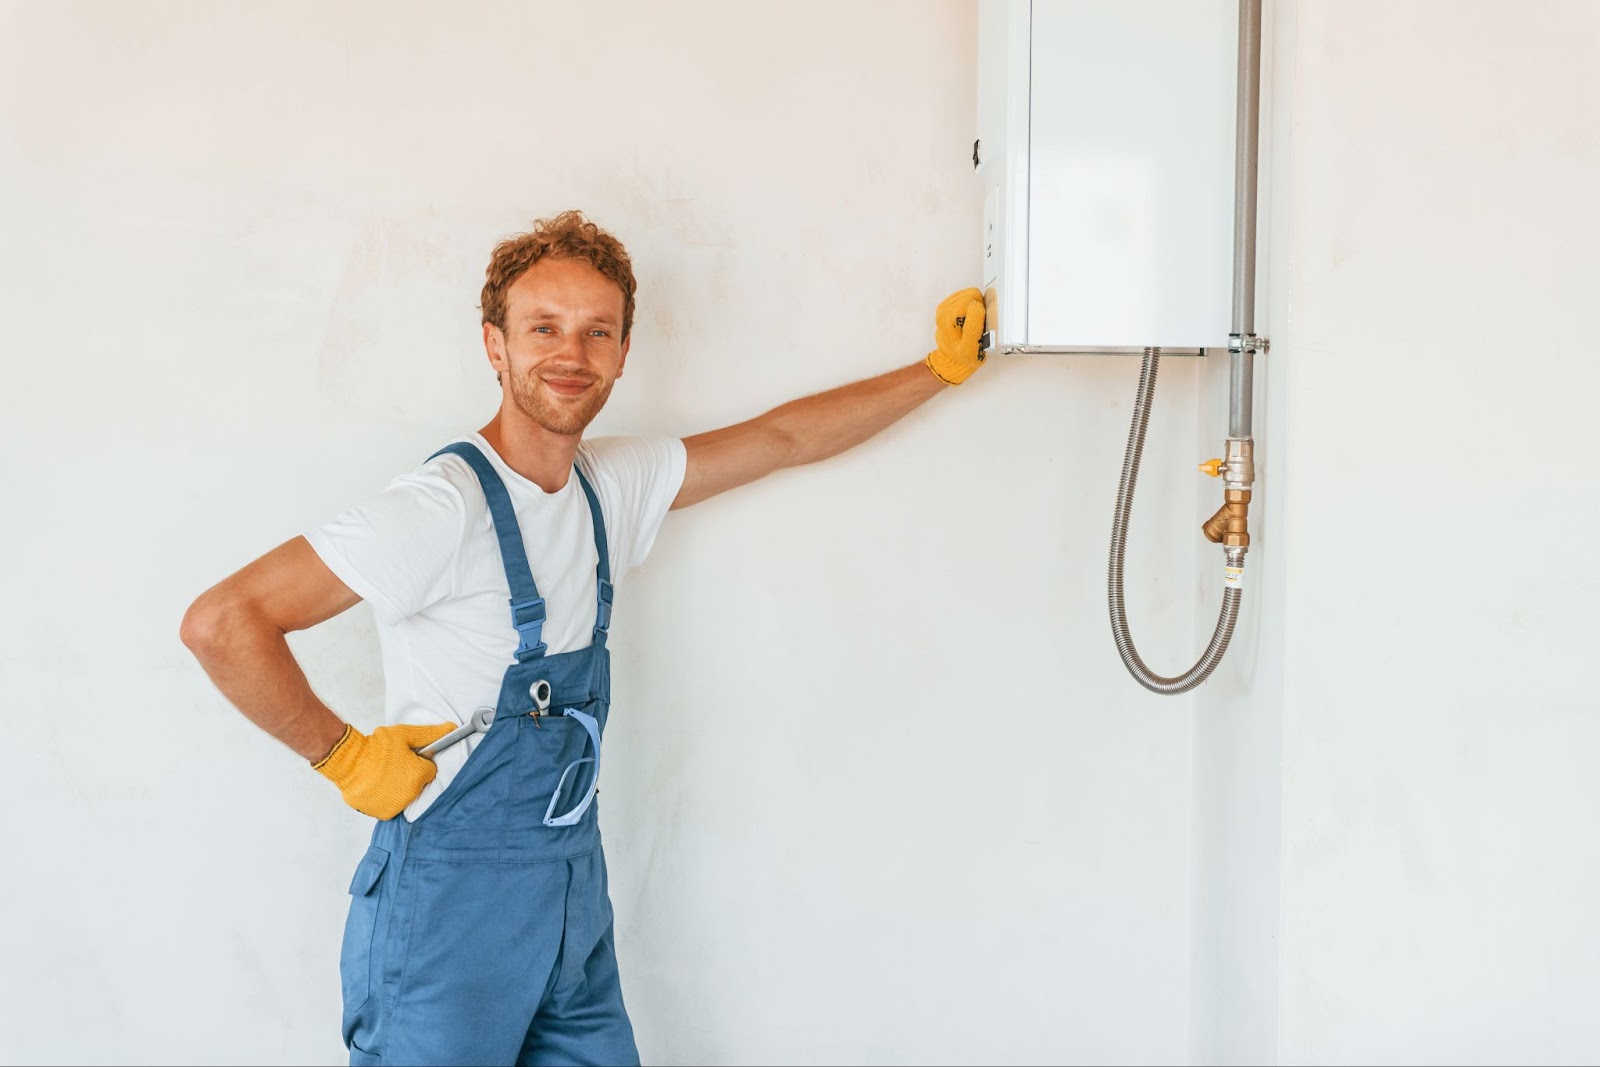 A construction worker wearing overalls and yellow gloves leaning on a newly installed tankless water heater.